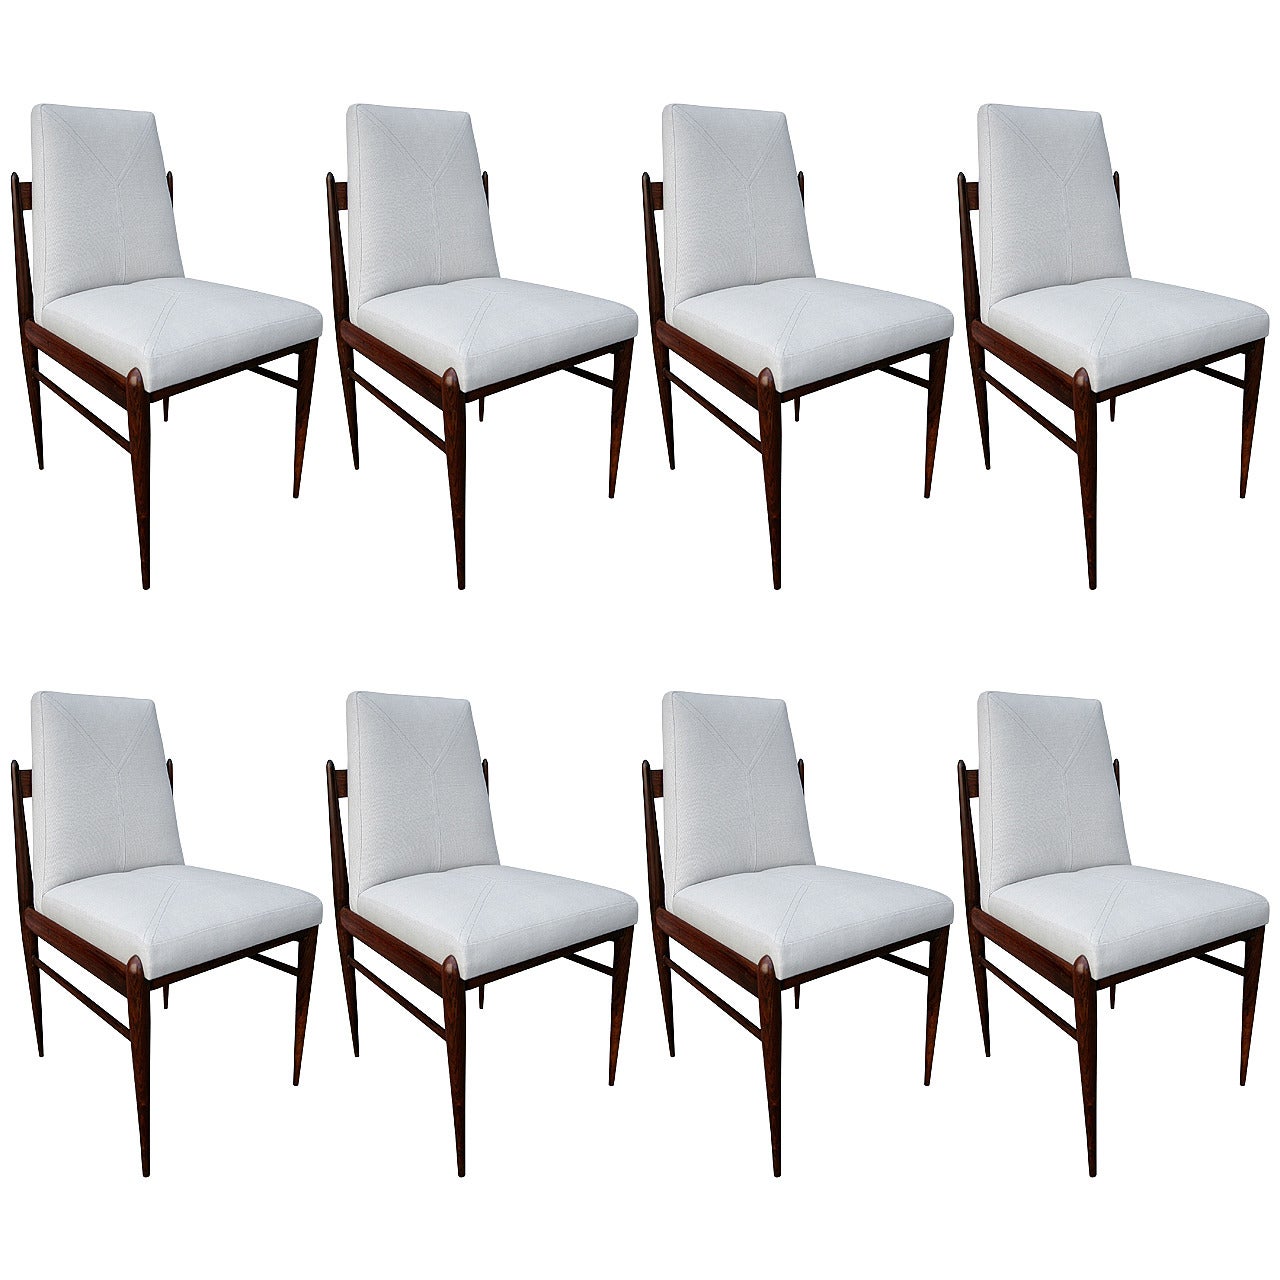 L'Atelier Brazilian Dining Chairs